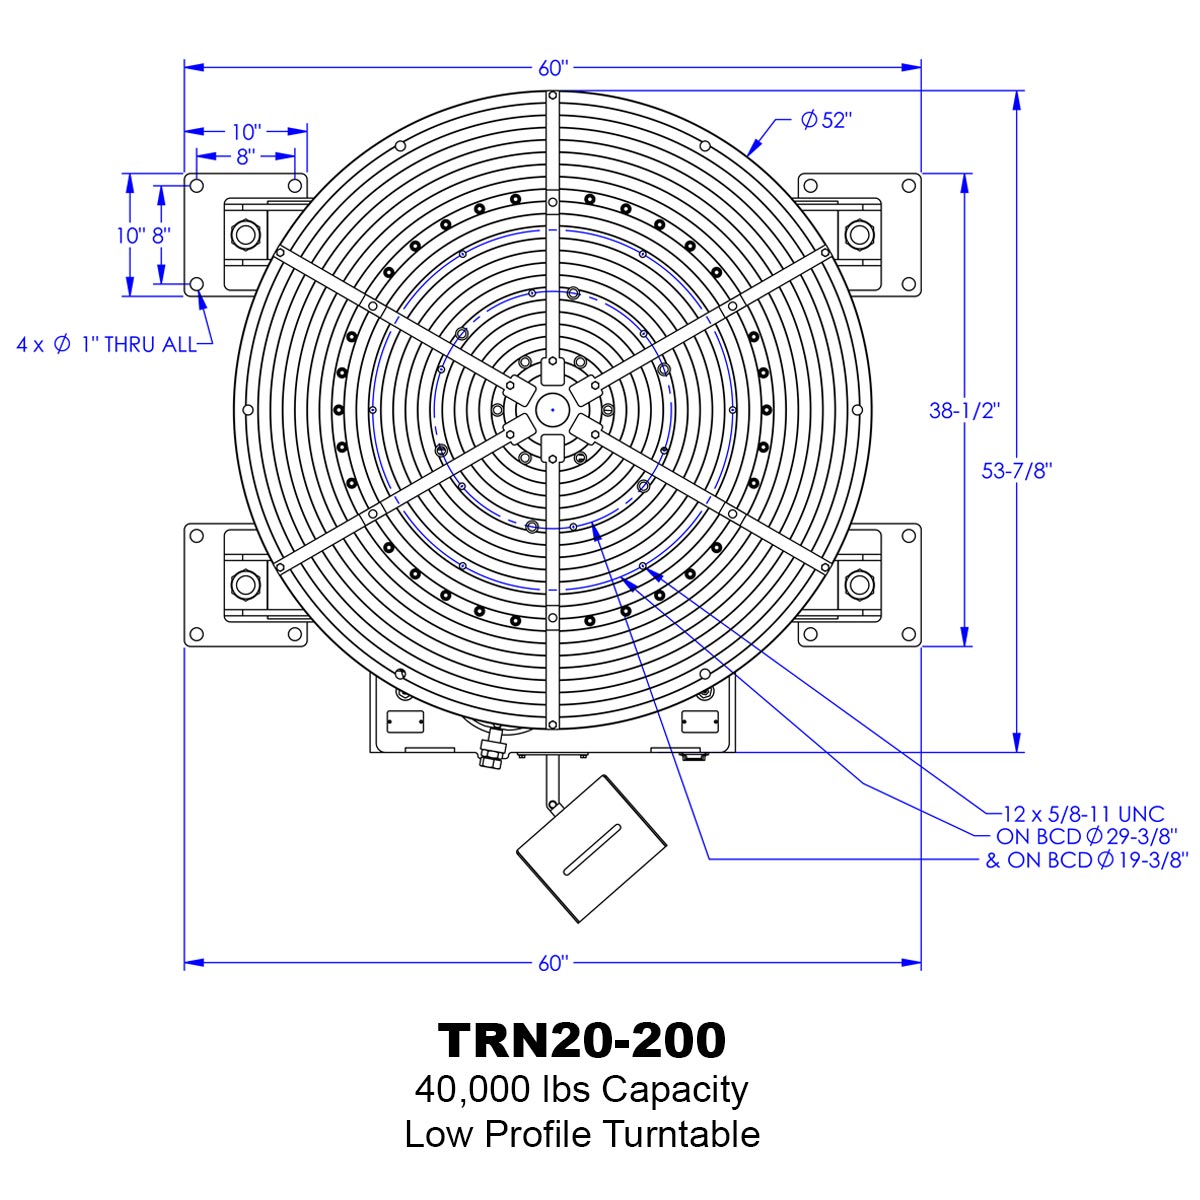 04-40000lbs-Low-Profile-Turntable